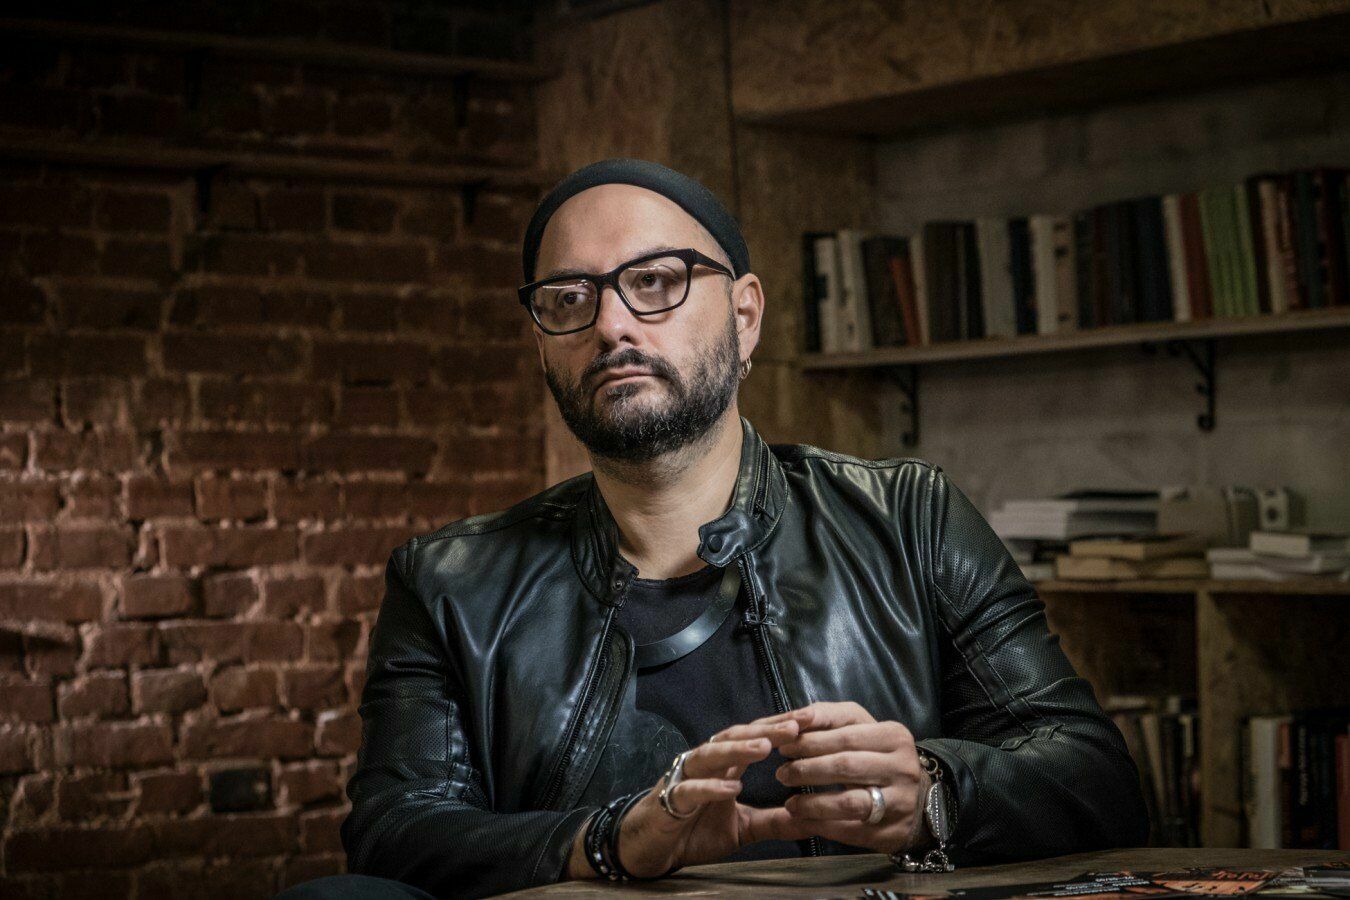 The name of Kirill Serebrennikov was removed from the website of the Moscow Art Theater named after Chekhov